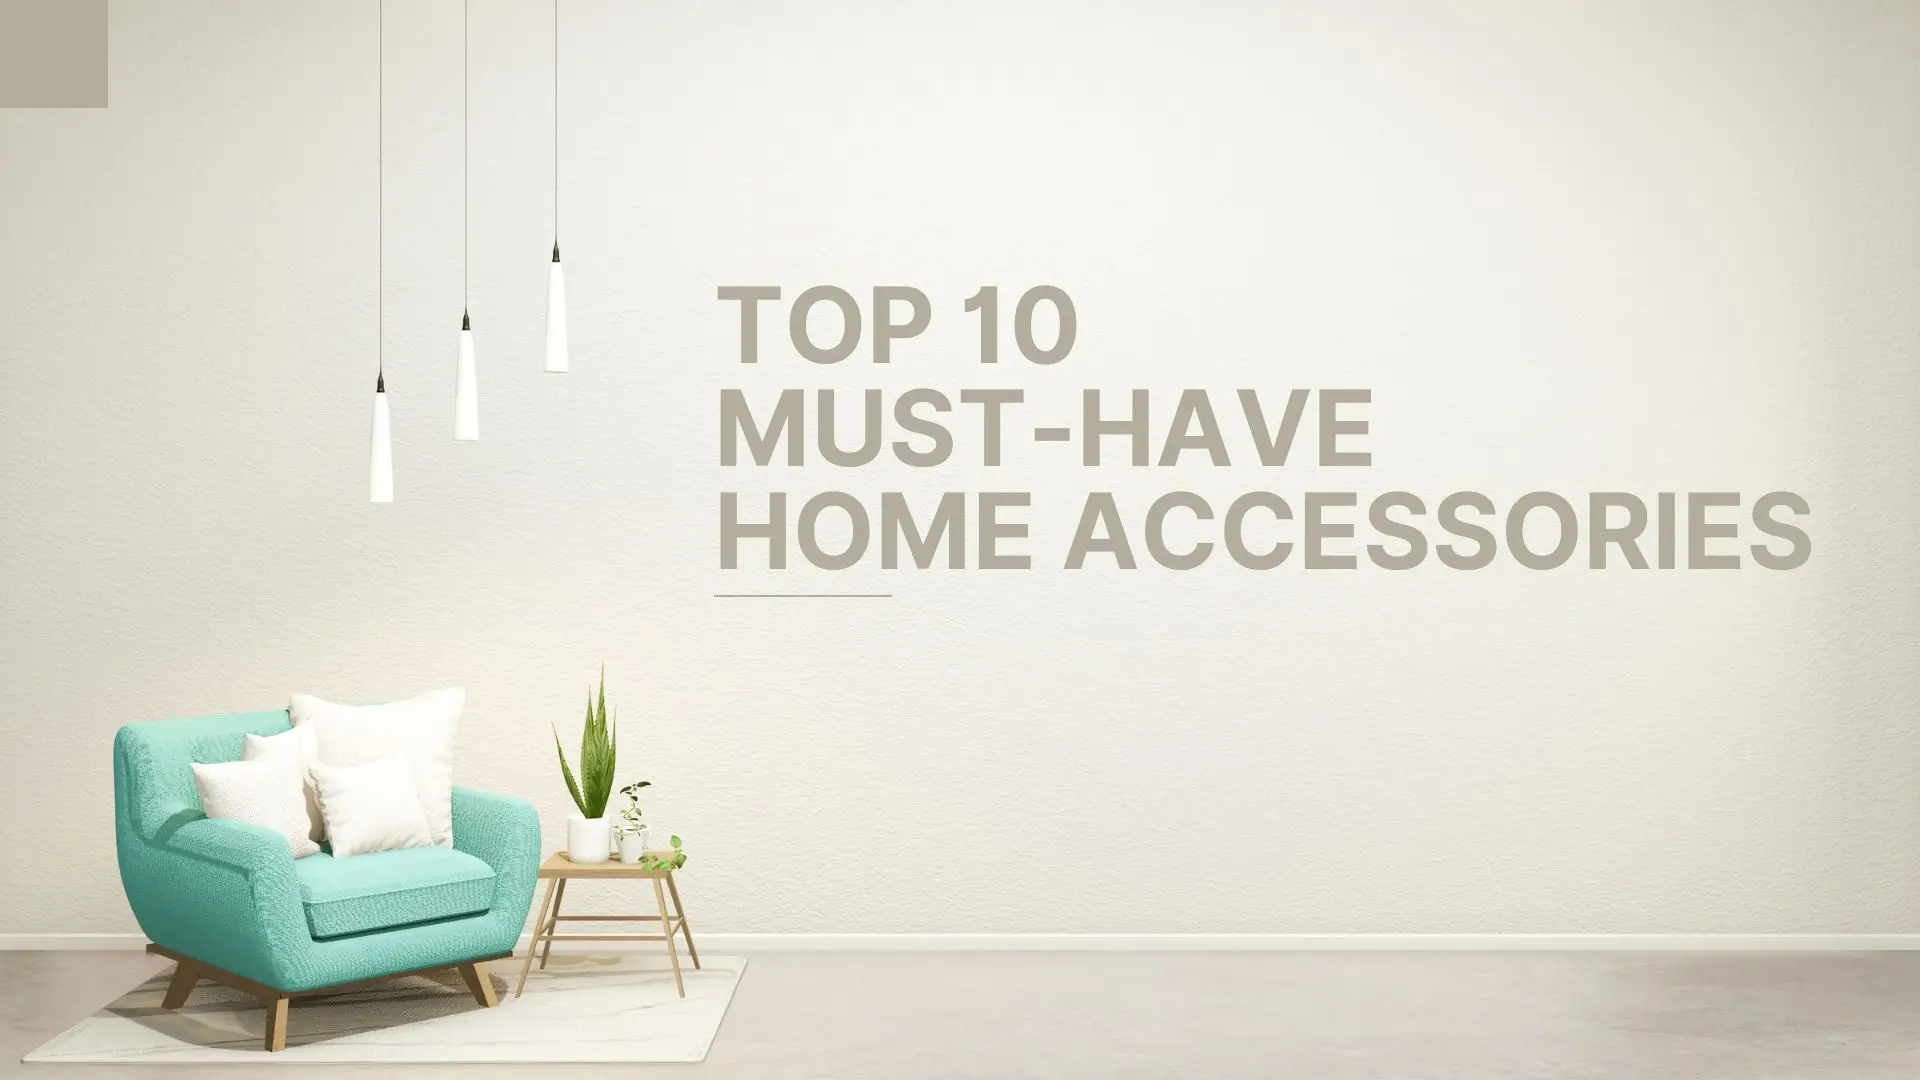 Top 10 Must-have Home Accessories